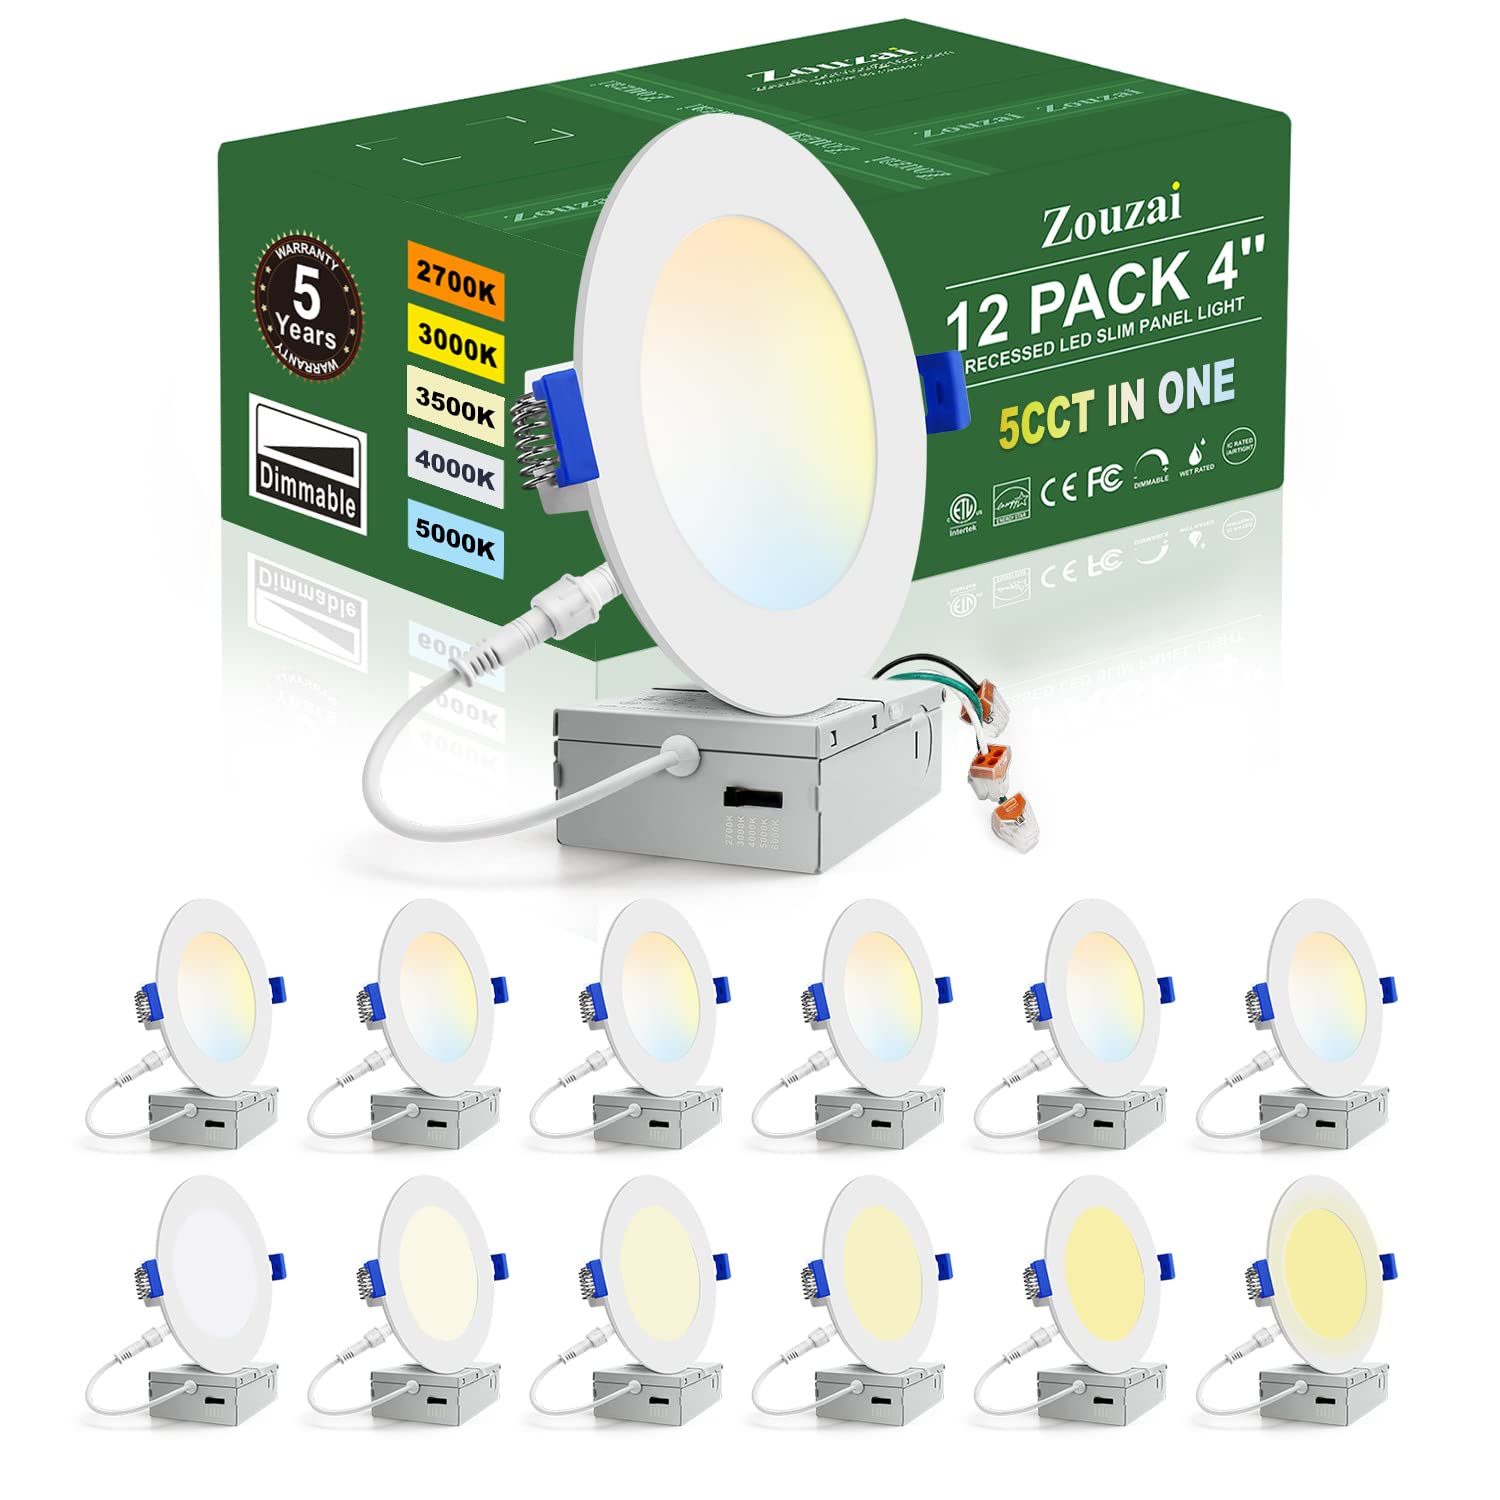 Zouzai 12 Pack 4 Inch 5CCT Ultra-Thin LED Recessed Ceiling Light with Junction Box